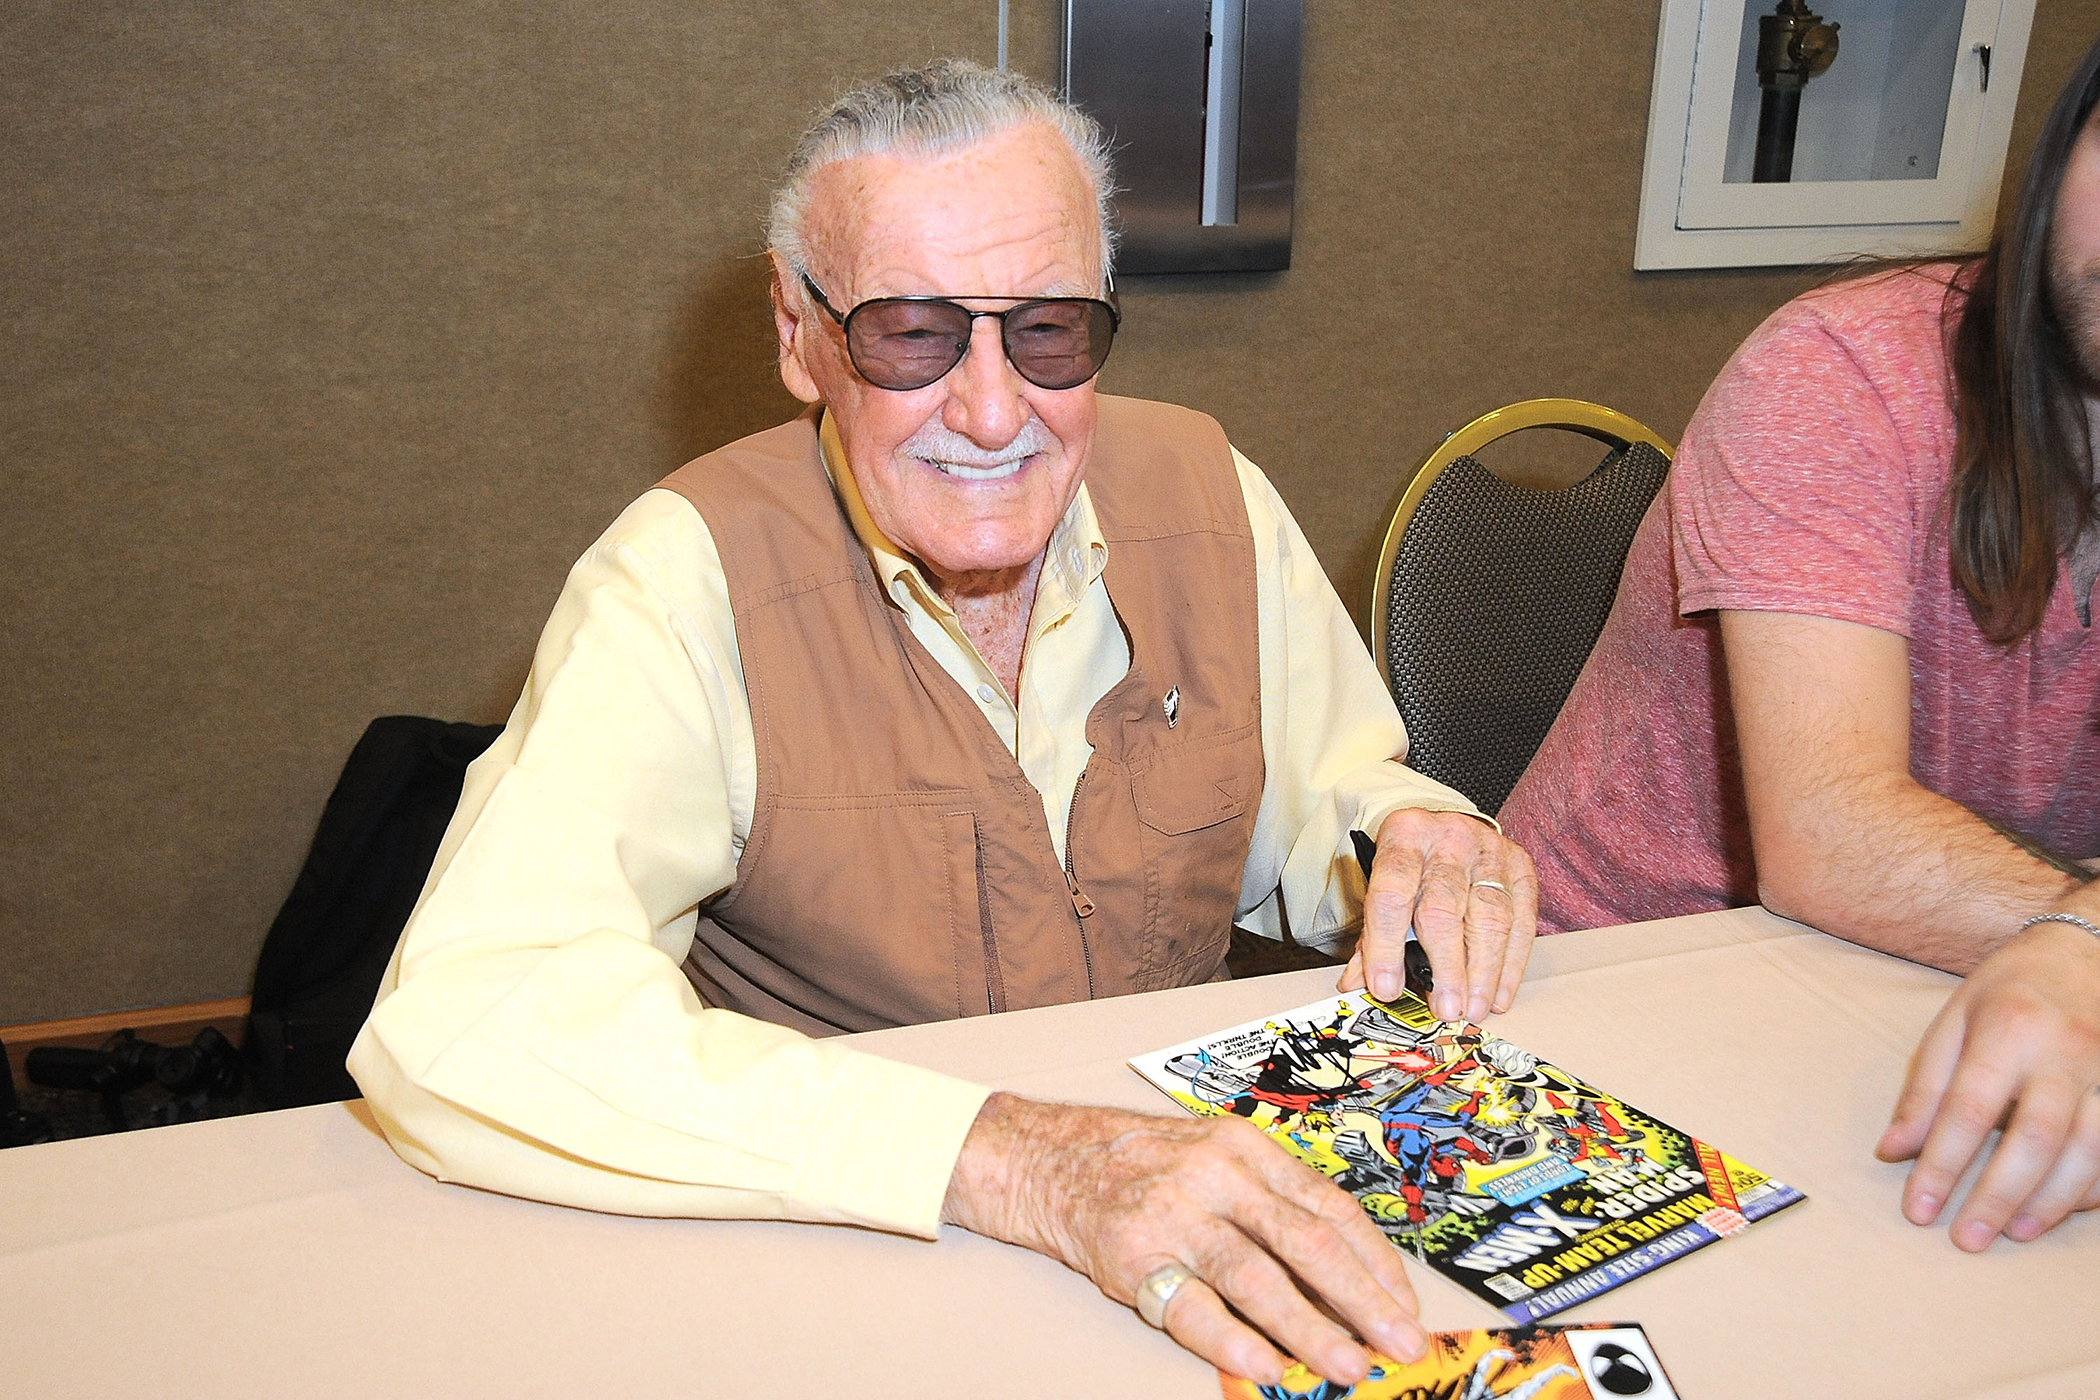 PALM SPRINGS, CA - AUGUST 27:  Comic Book Legend Stan Lee attends Comic Con Palm Springs 2016 at Palm Springs Convention Center on August 27, 2016 in Palm Springs, California.  (Photo by David Crotty/Getty Images)